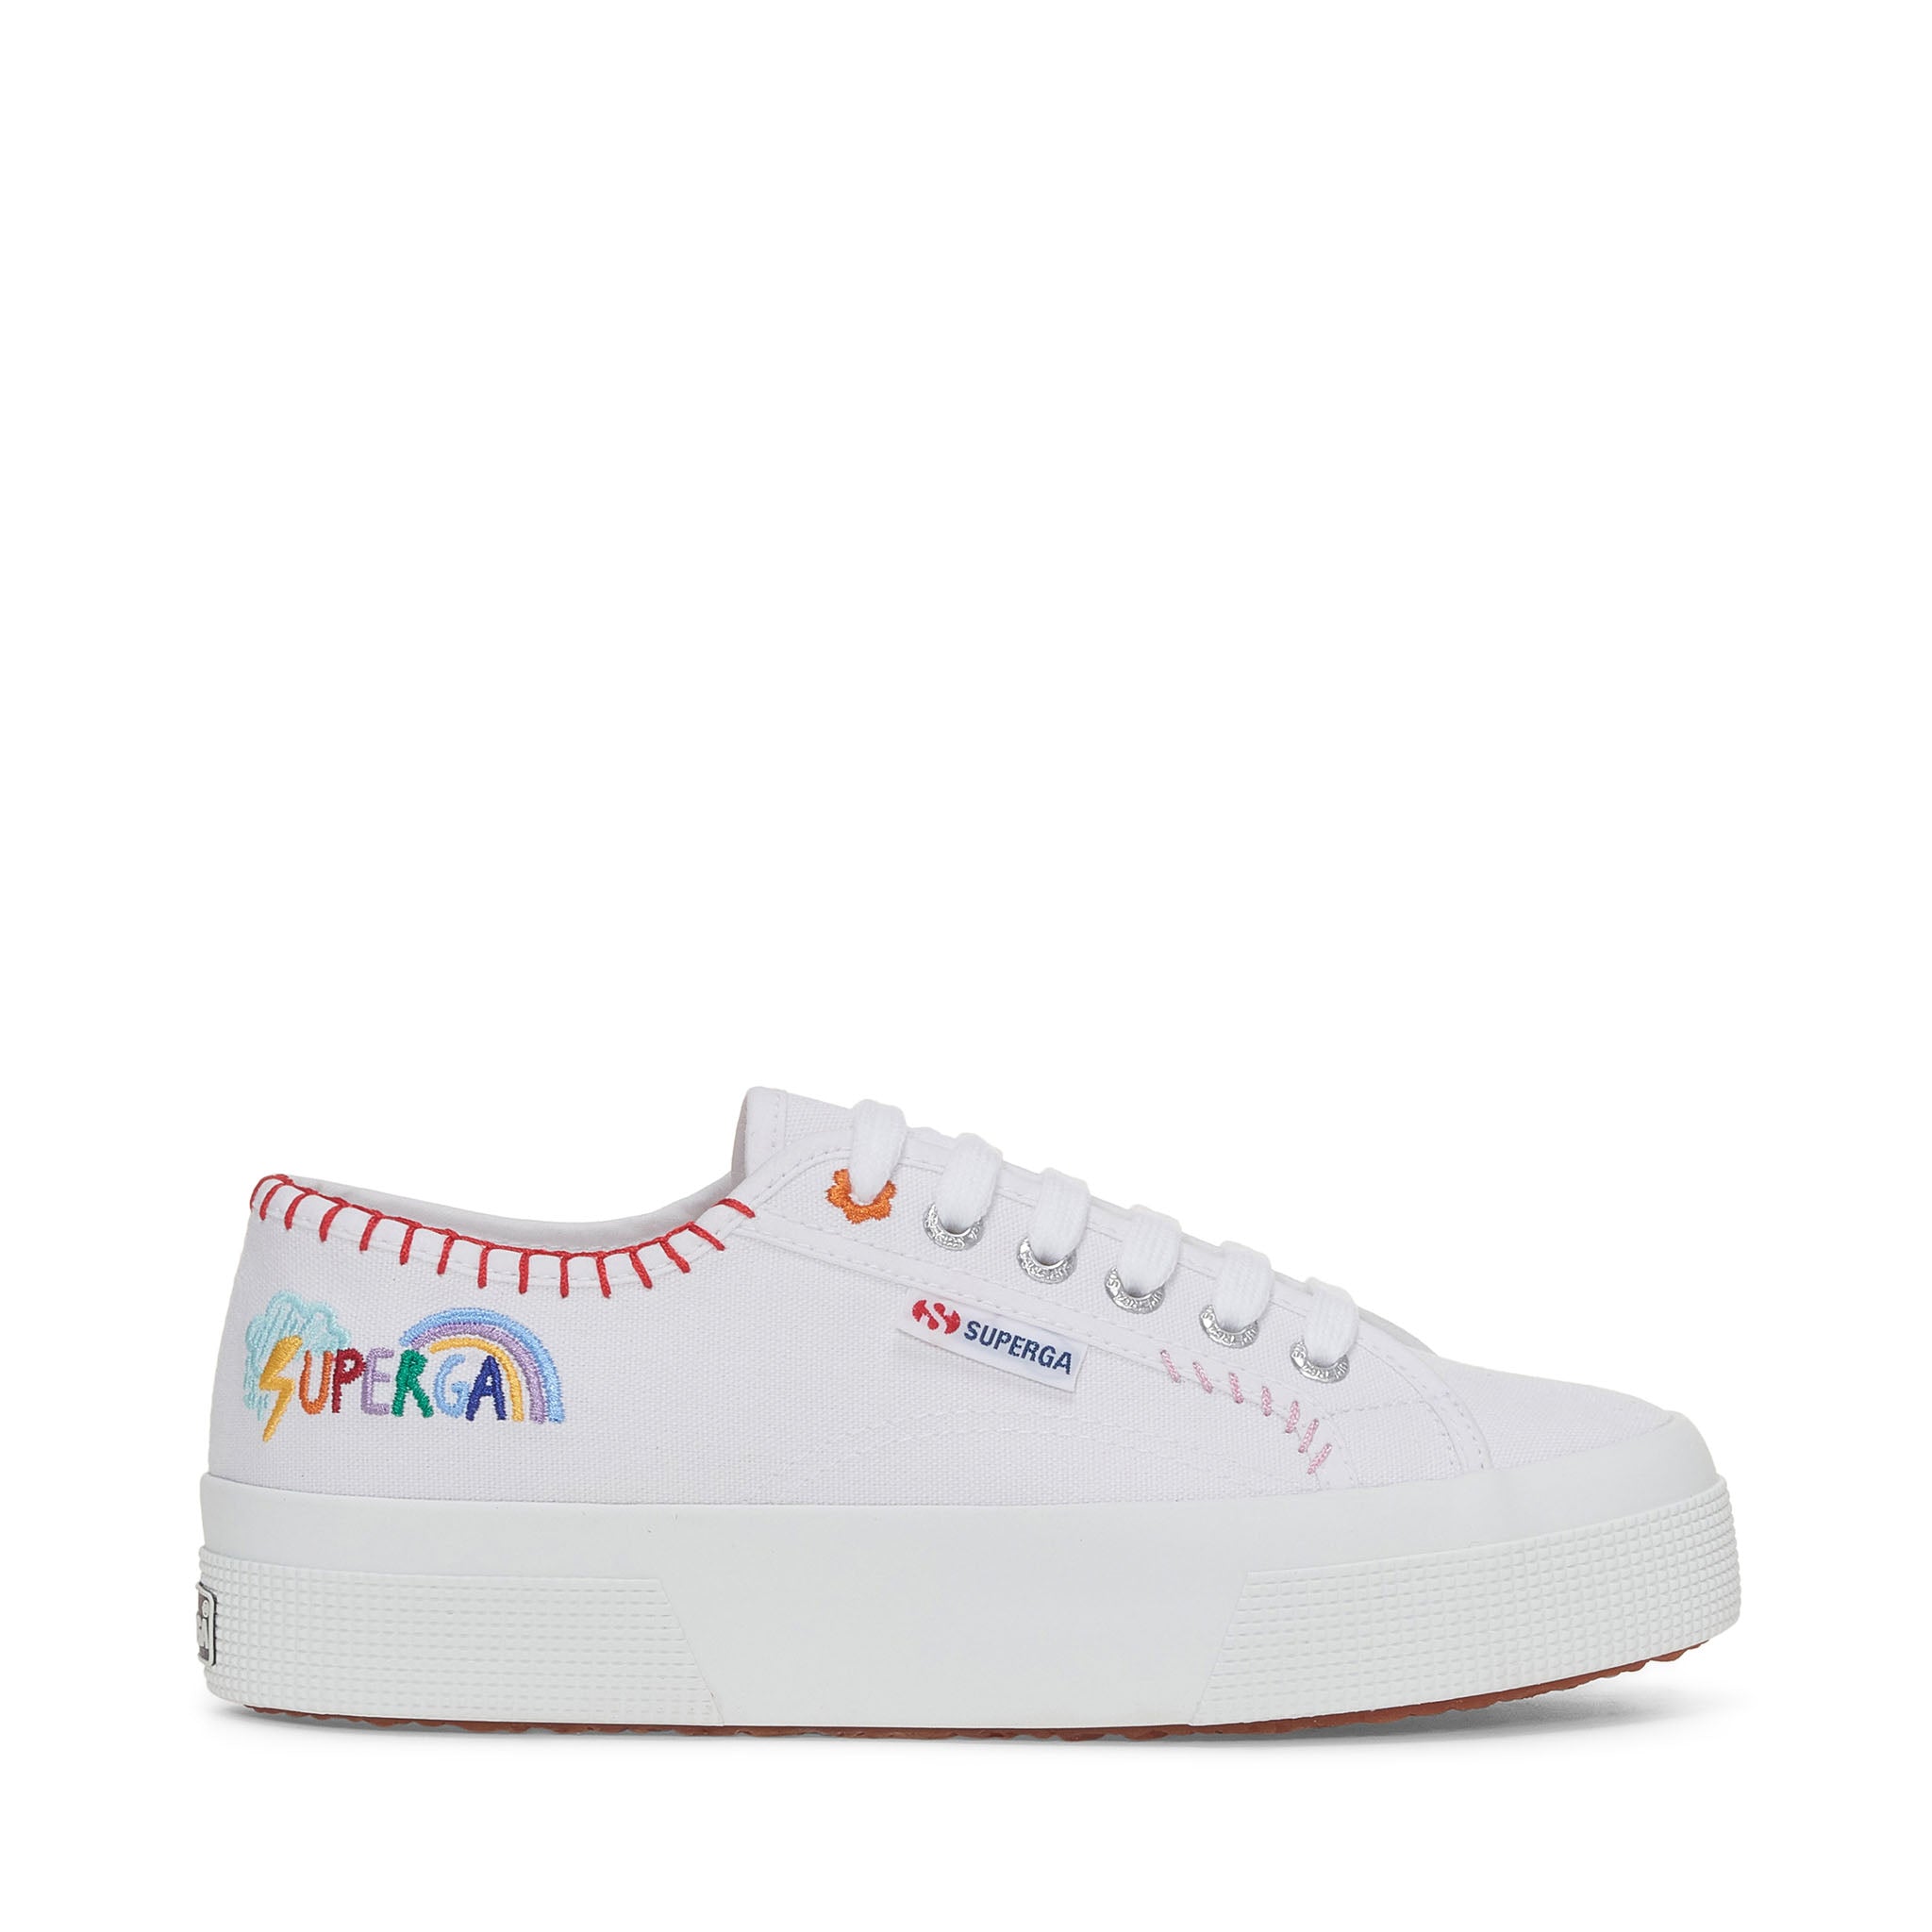 Superga 2740 Happy Logo Sneakers - White Multicolor Embroidery Logo. Side view.